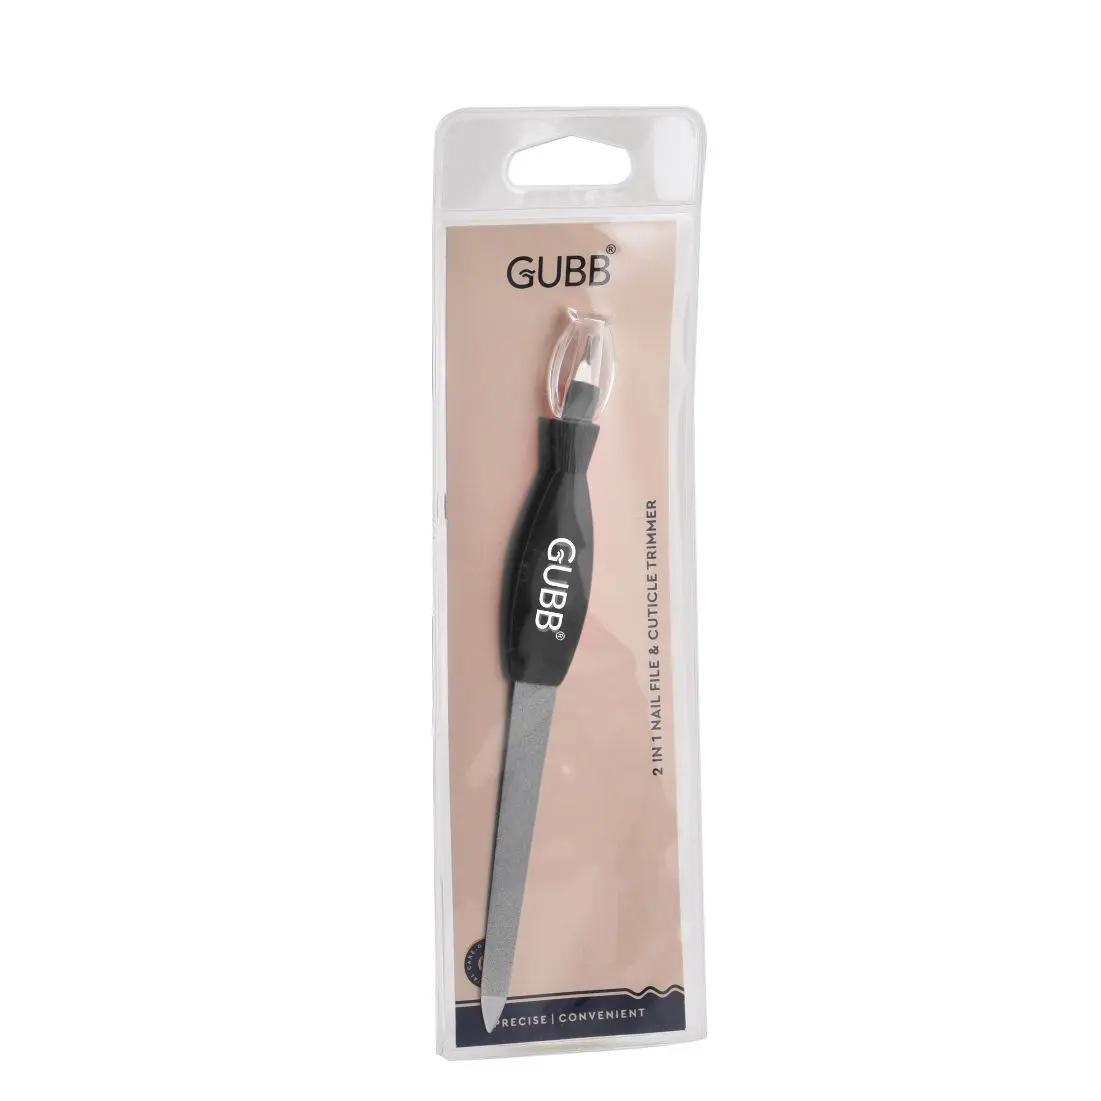 GUBB 2 In 1 Nail File & Cuticle Trimmer